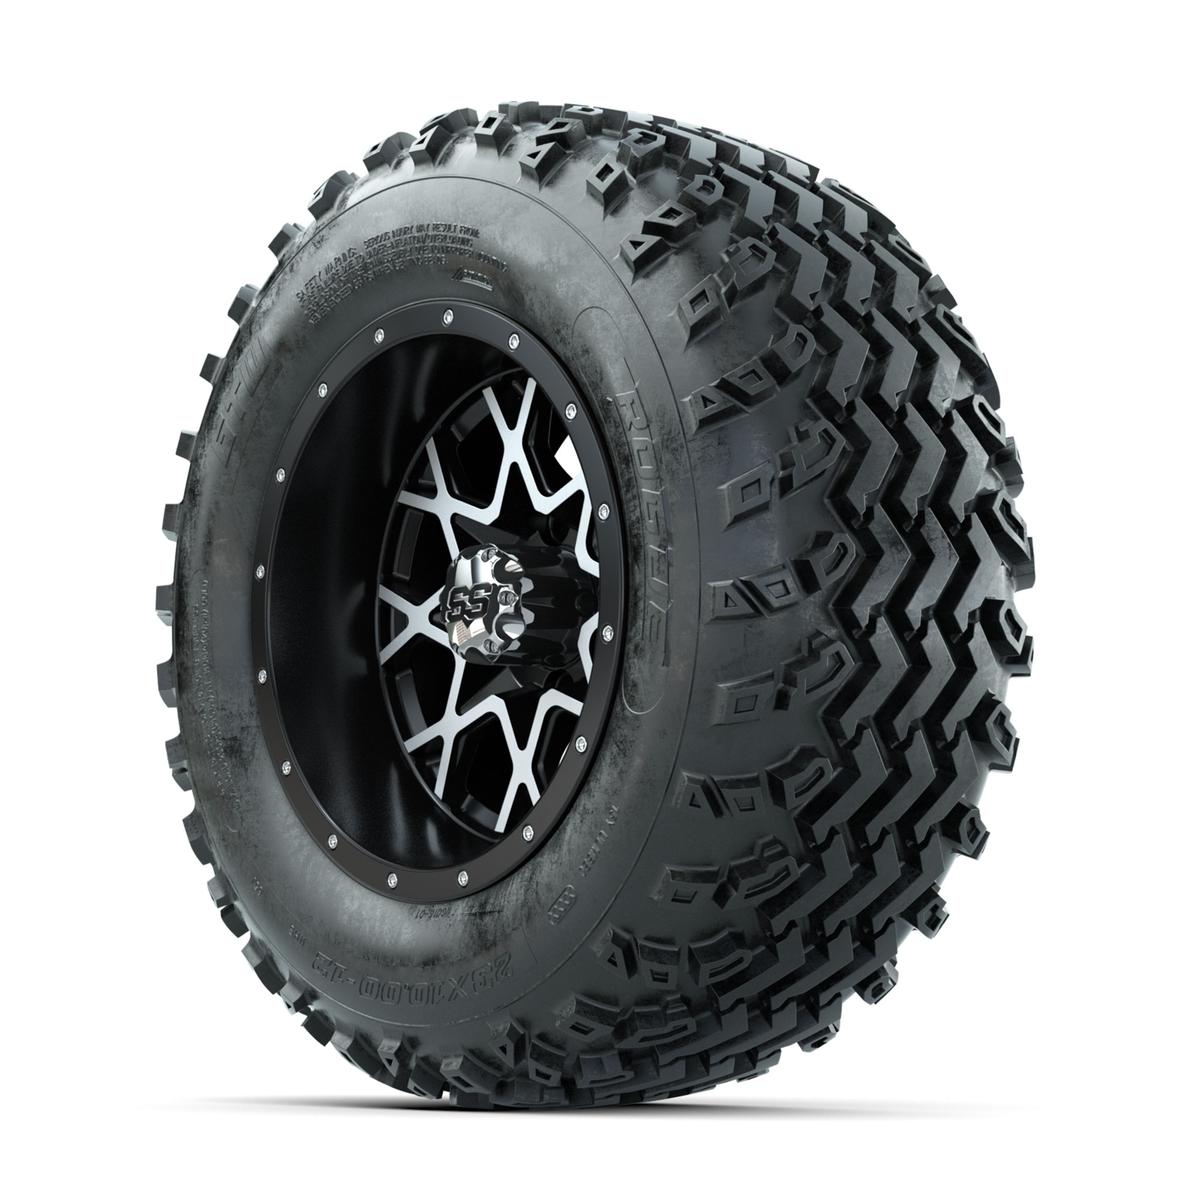 GTW Vortex Machined/Matte Black 12 in Wheels with 23x10.00-12 Rogue All Terrain Tires – Full Set